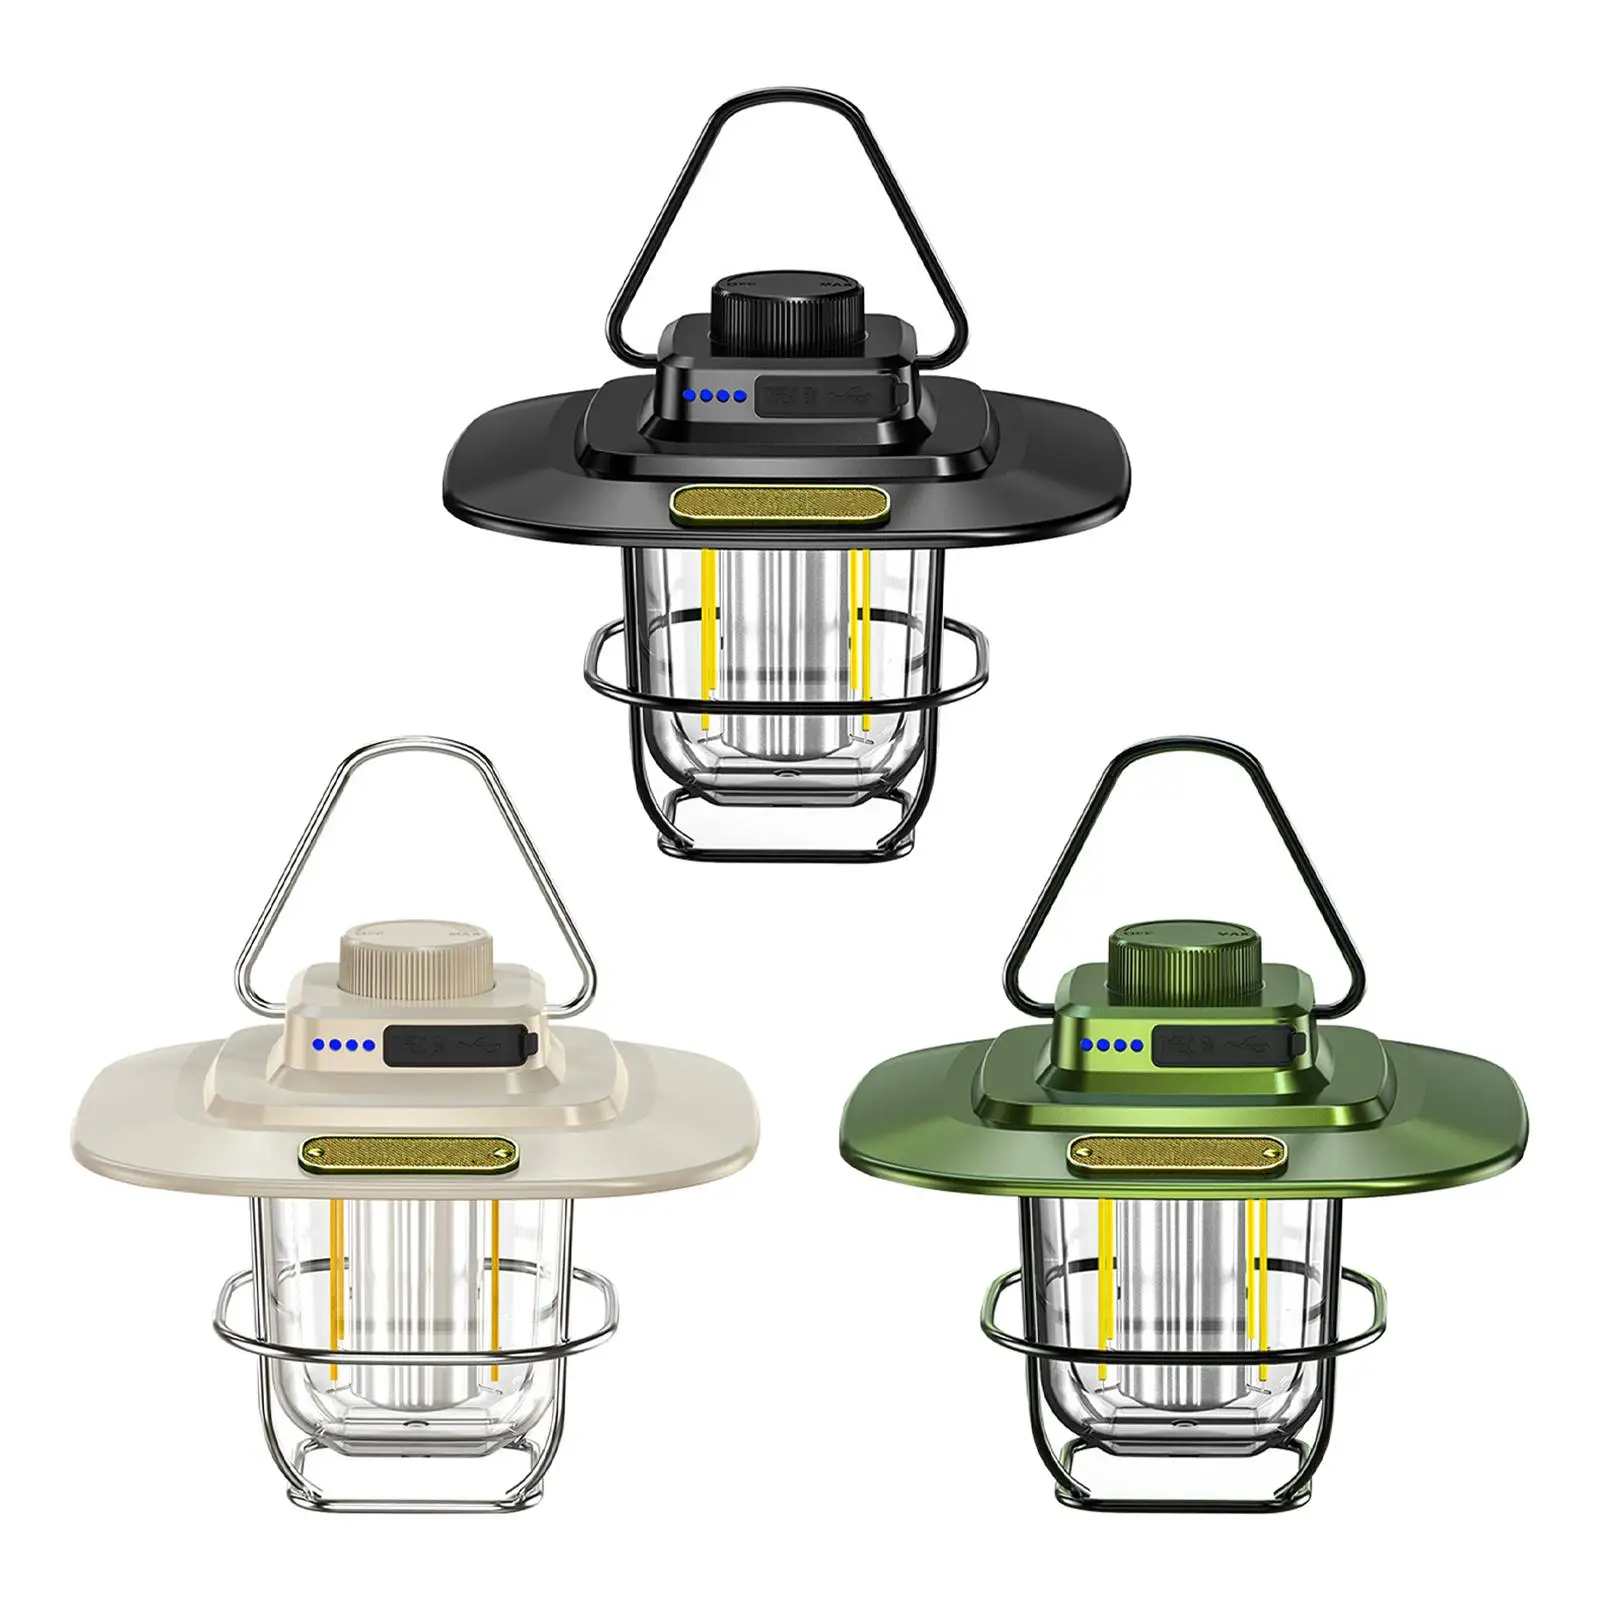 Mini LED Camping Lantern Night Lamp Portable Landscaping Lighting USB Charging Waterproof Tent Light for Garden Indoors Outdoors